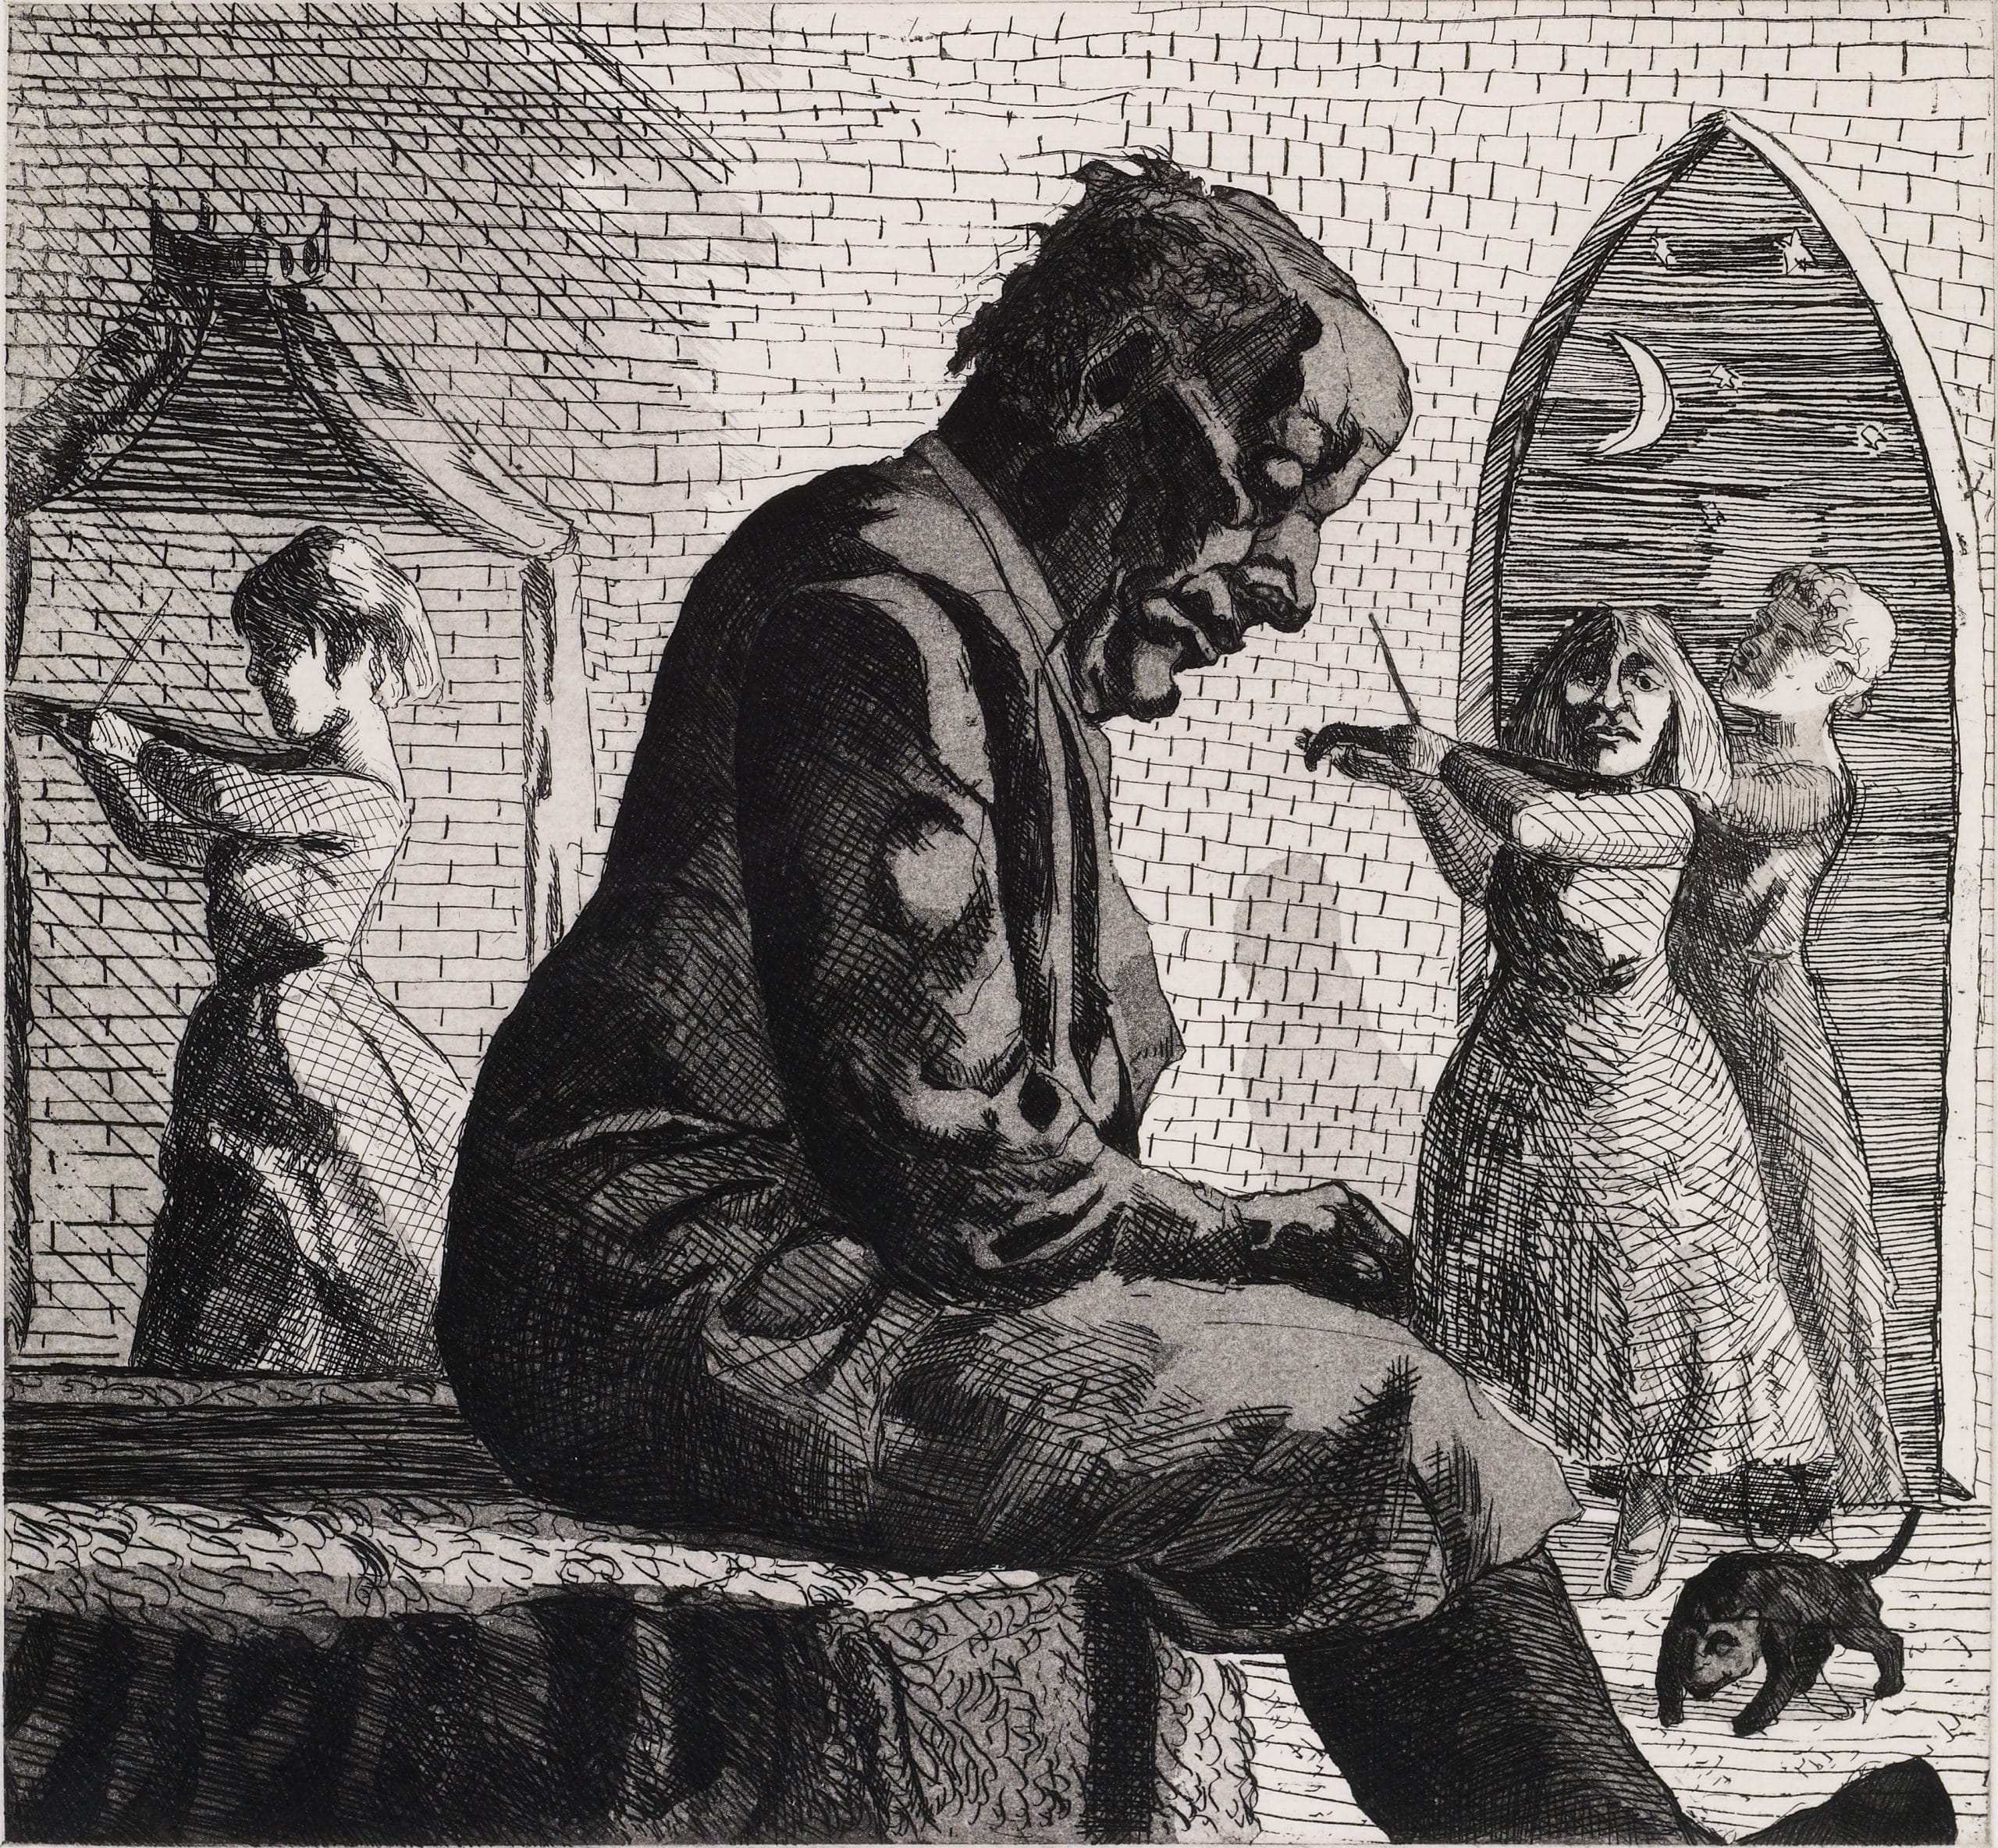 An black and white print created by Paula Rego featuring a man sat on the end of a bed.